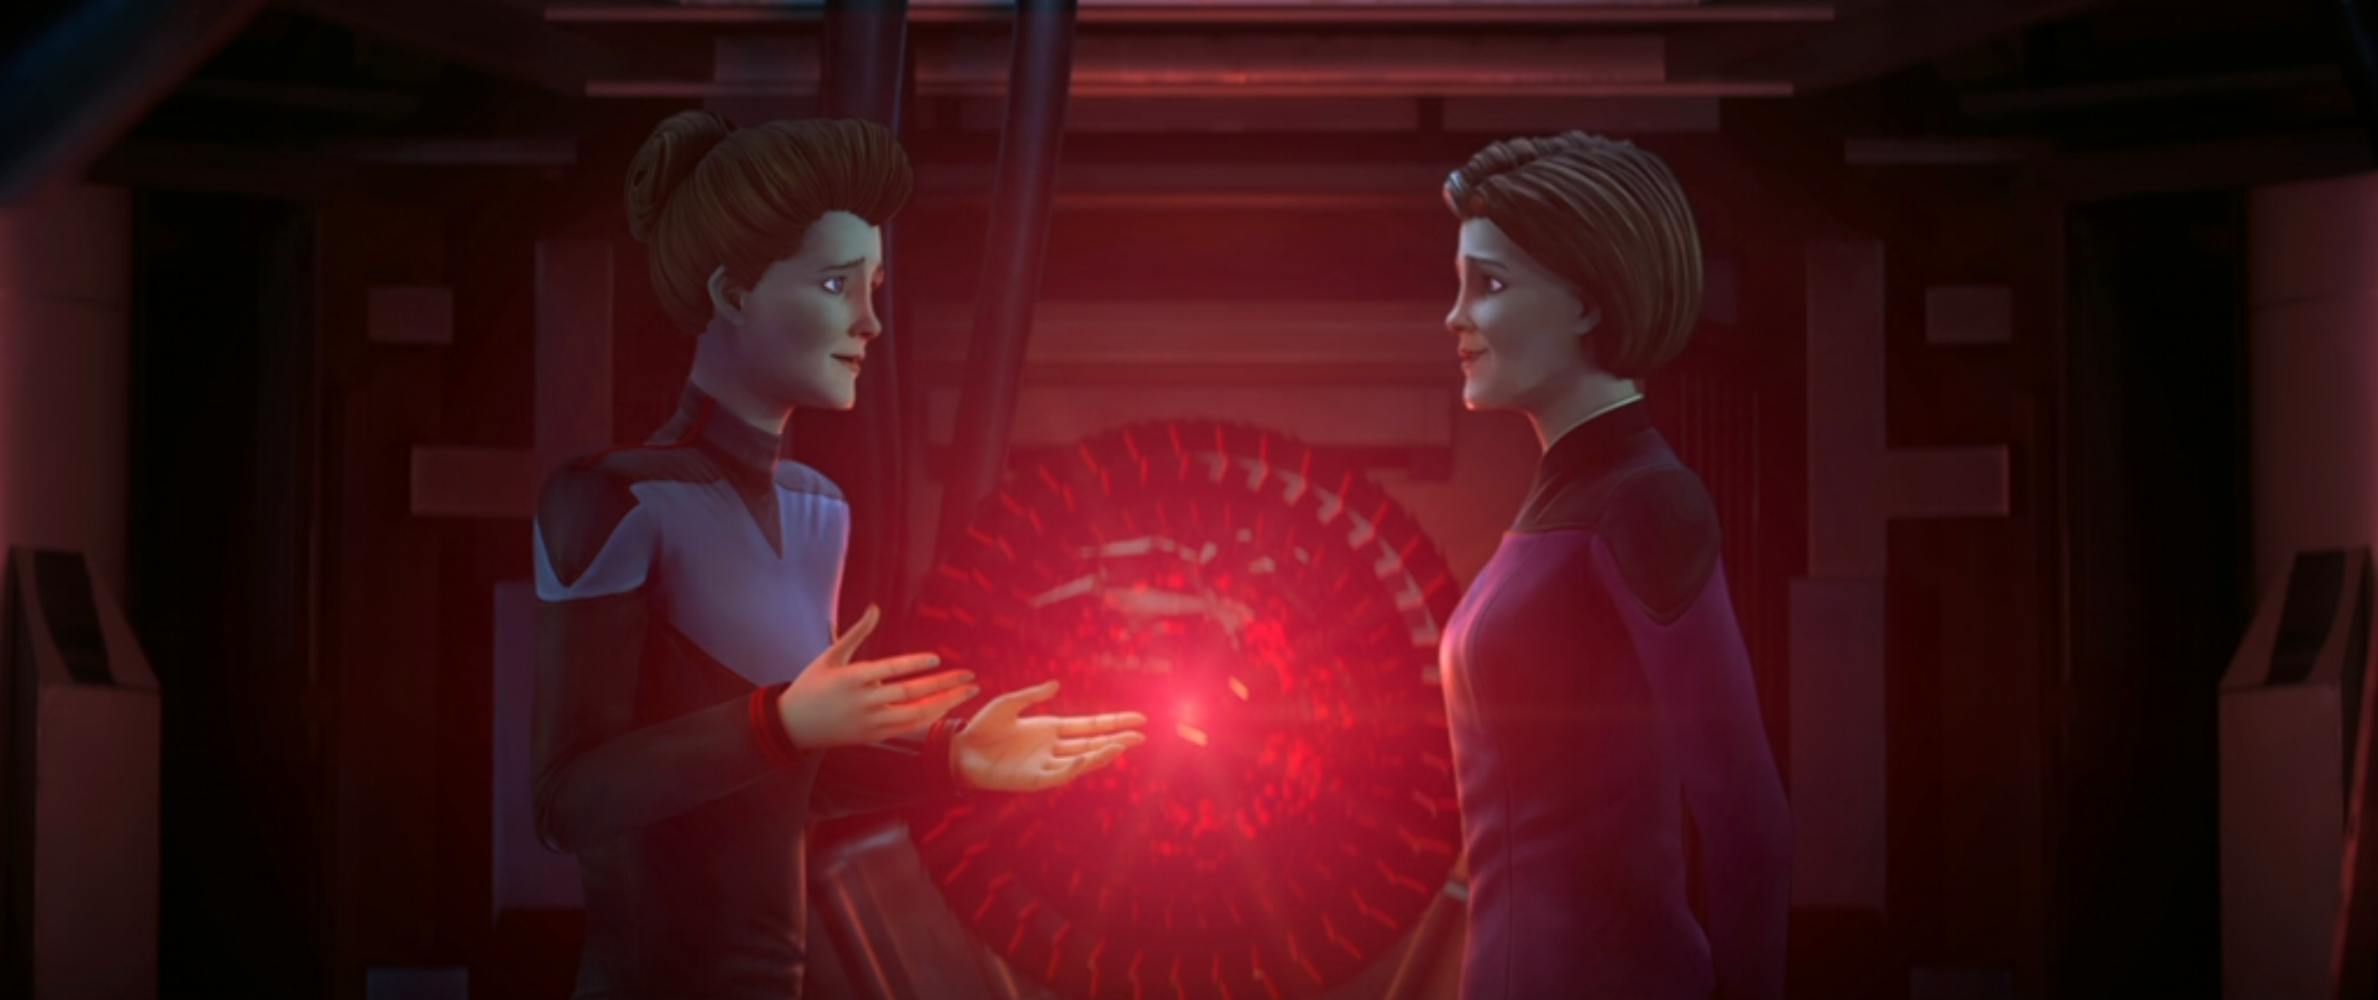 Holo-Janeway faces Vice Admiral Janeway in front of the Living Construct on Star Trek: Prodigy